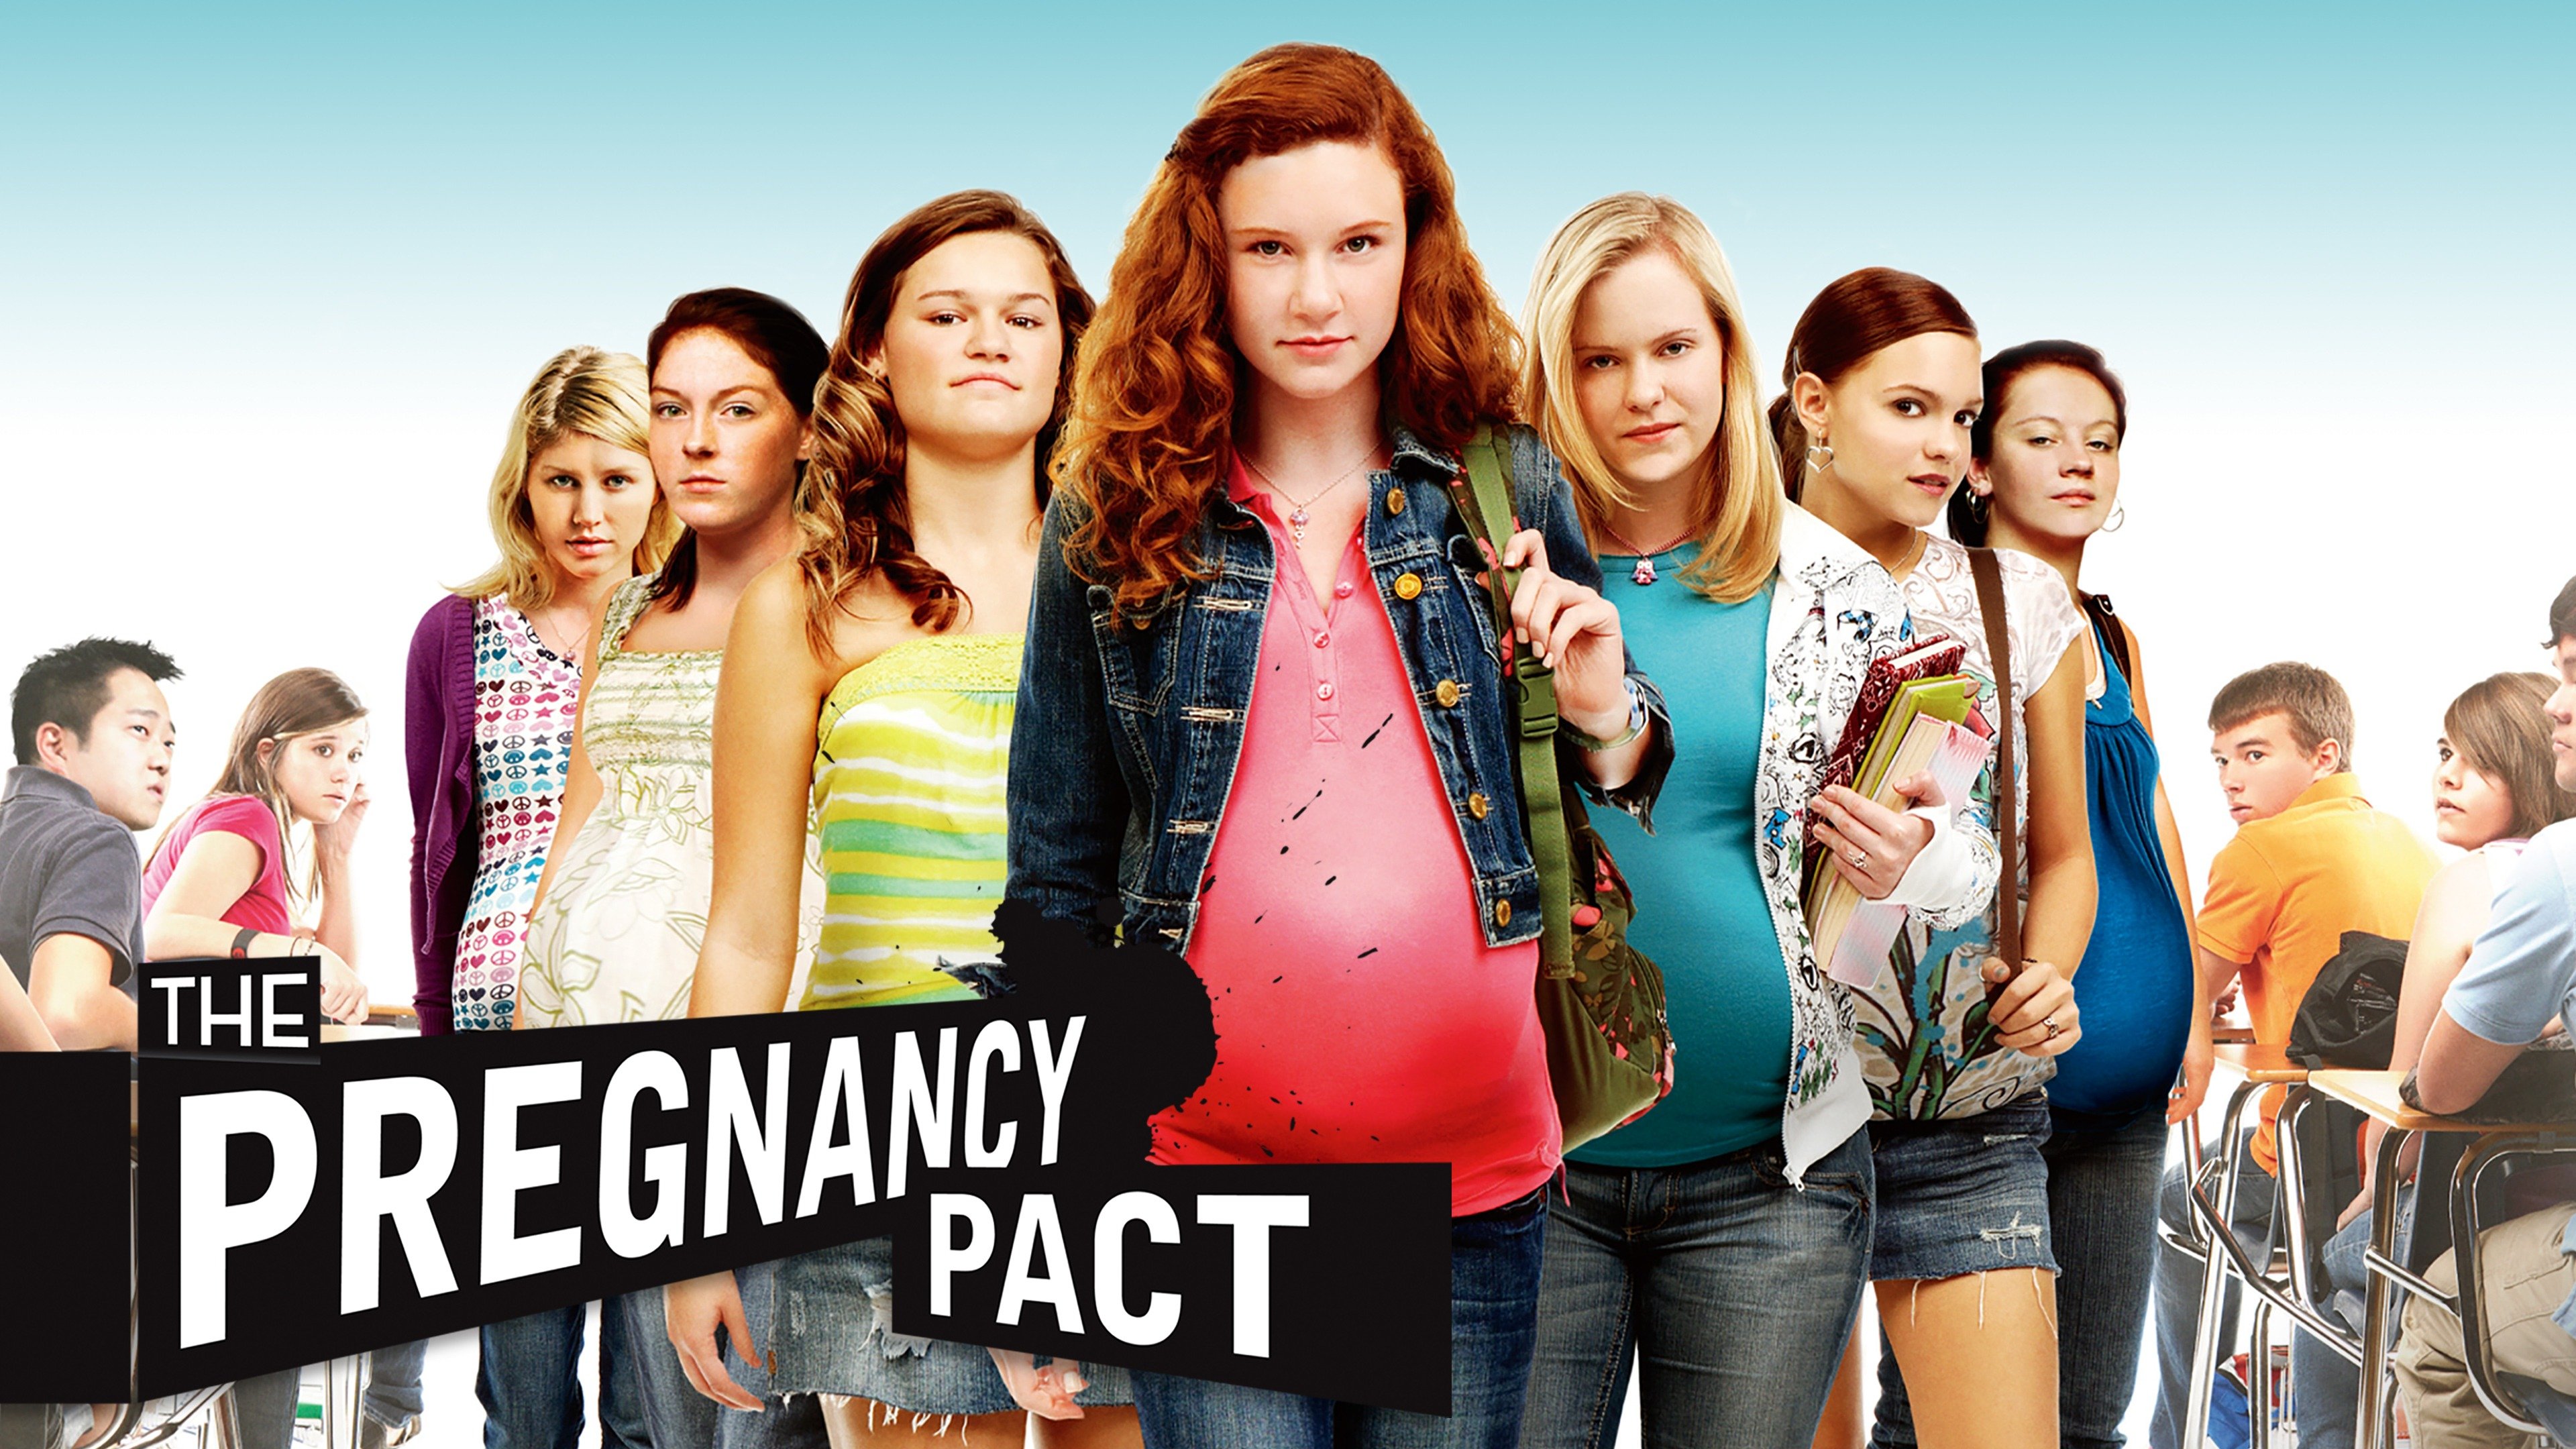 pregnancy pact full movie